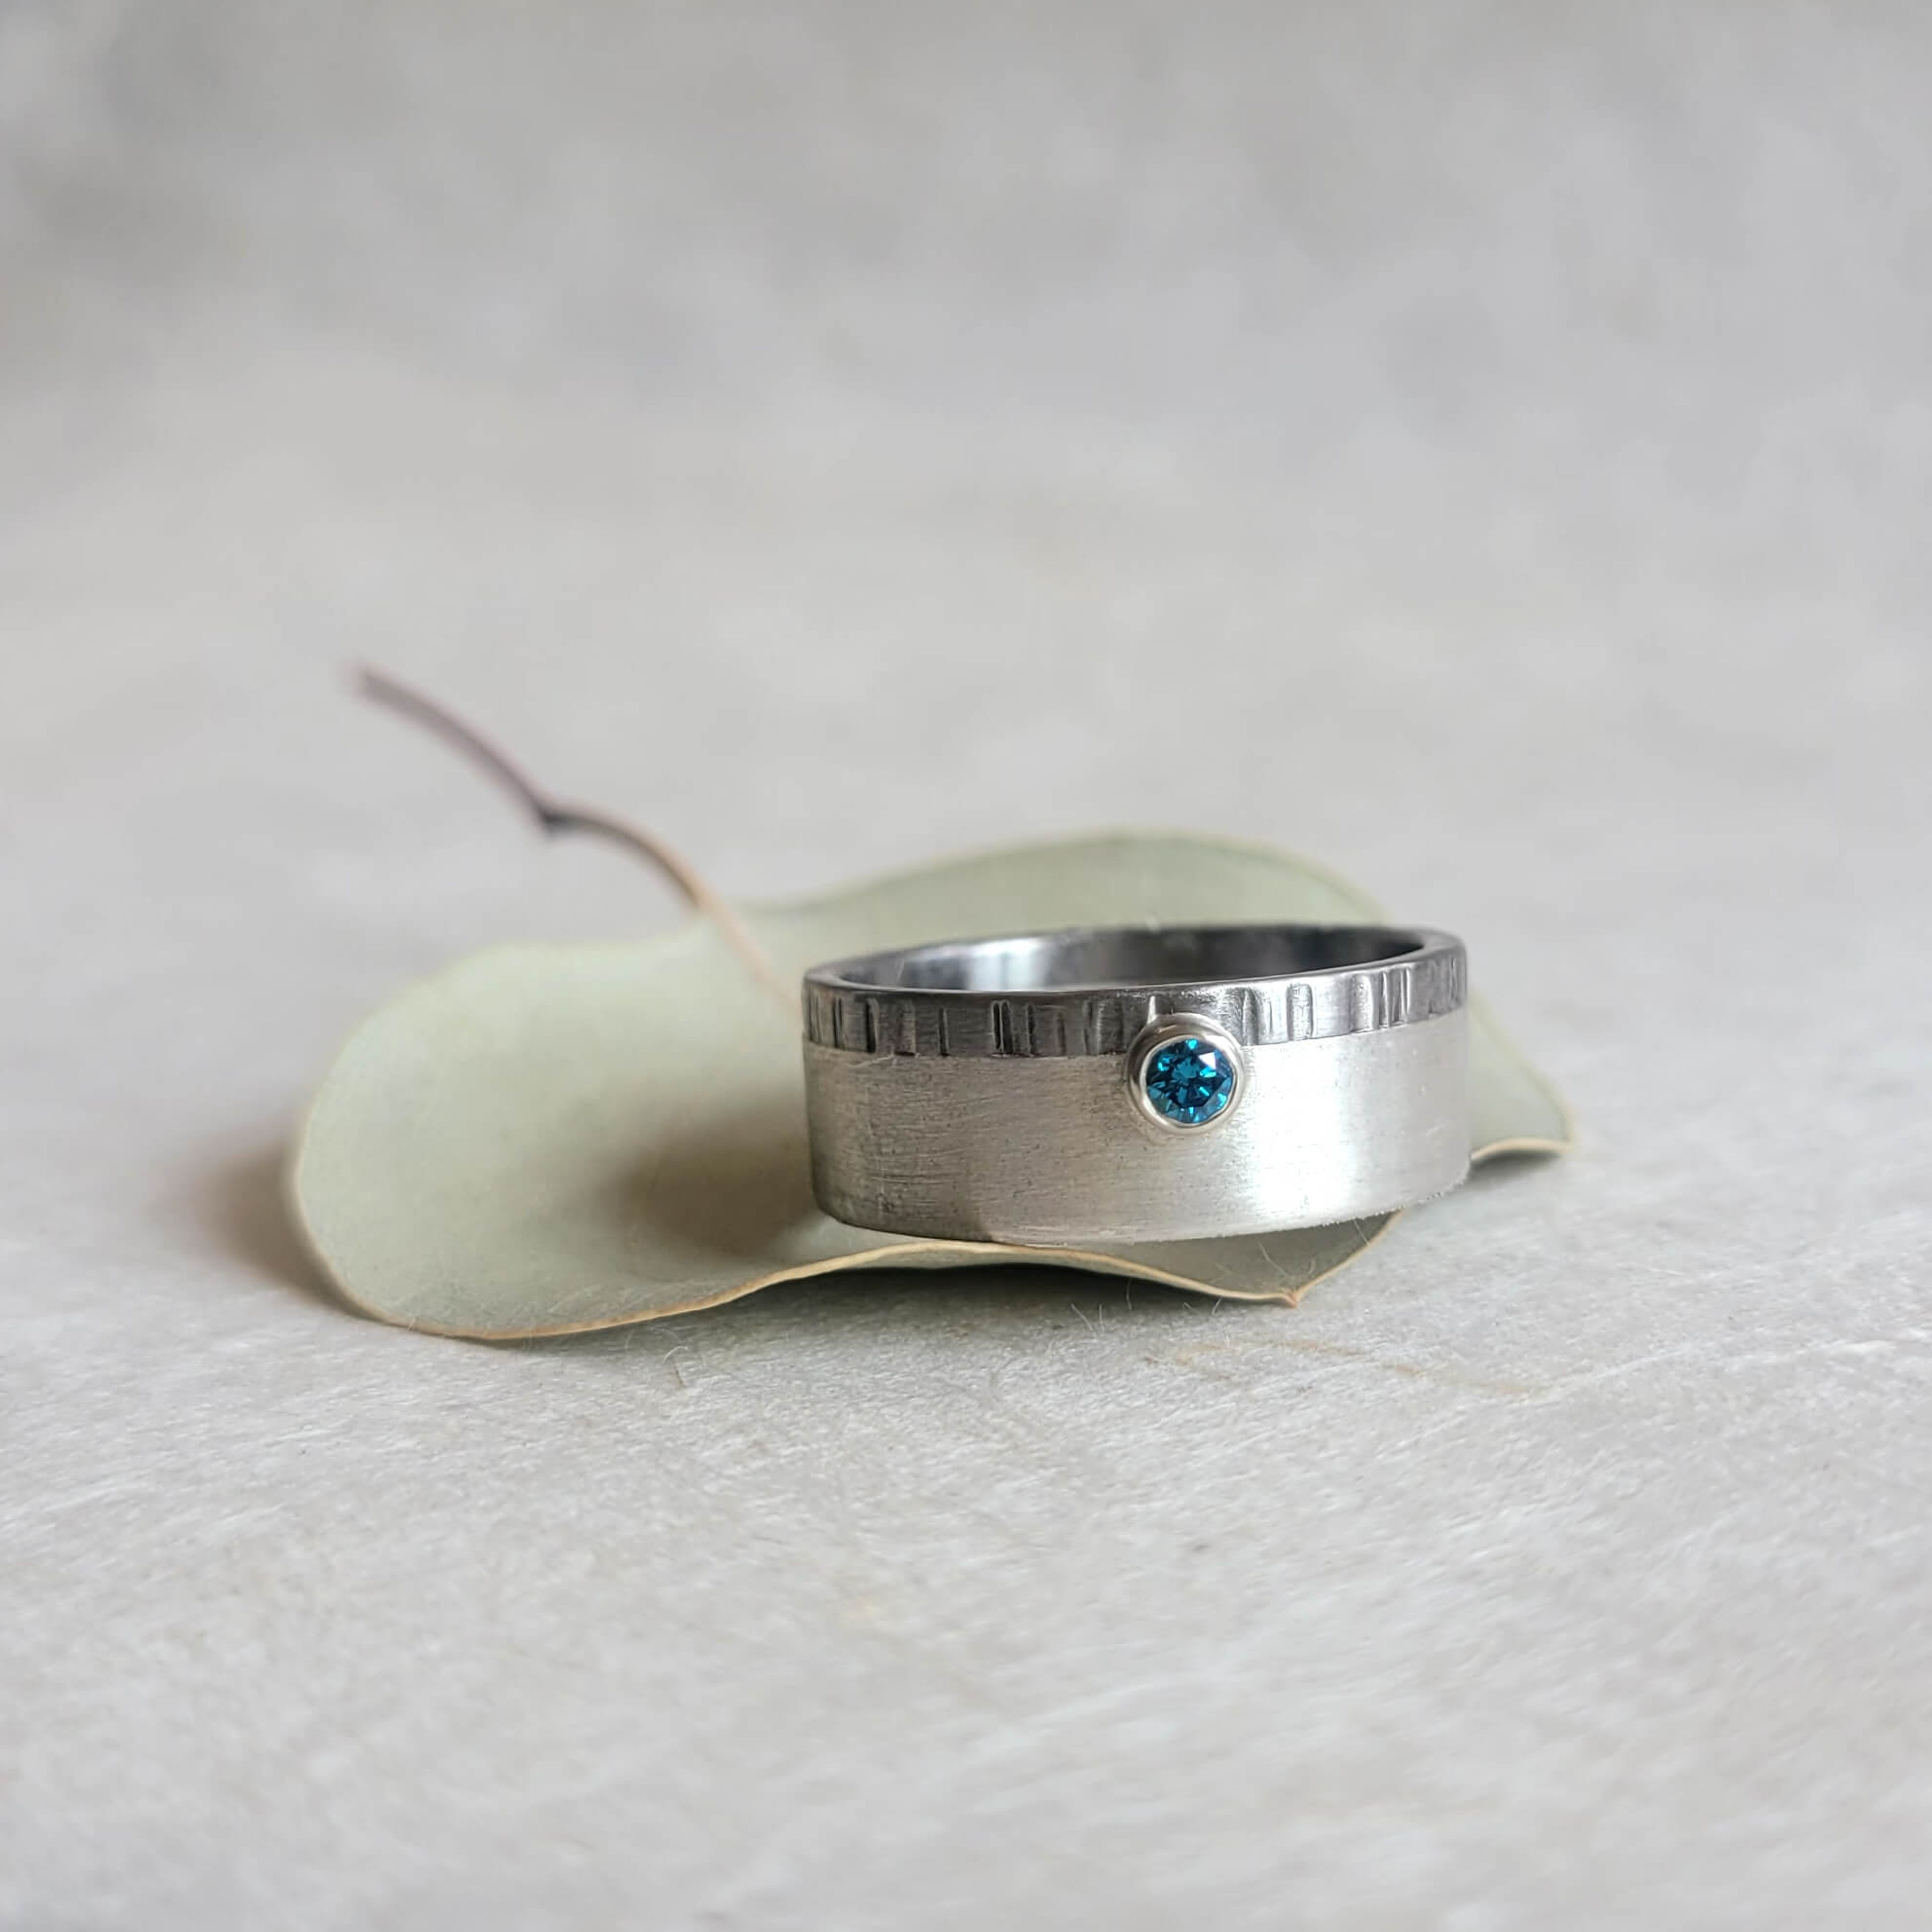 8mm Band in Hammered Palladium and Satin Sterling Silver with Blue Diamond Accent